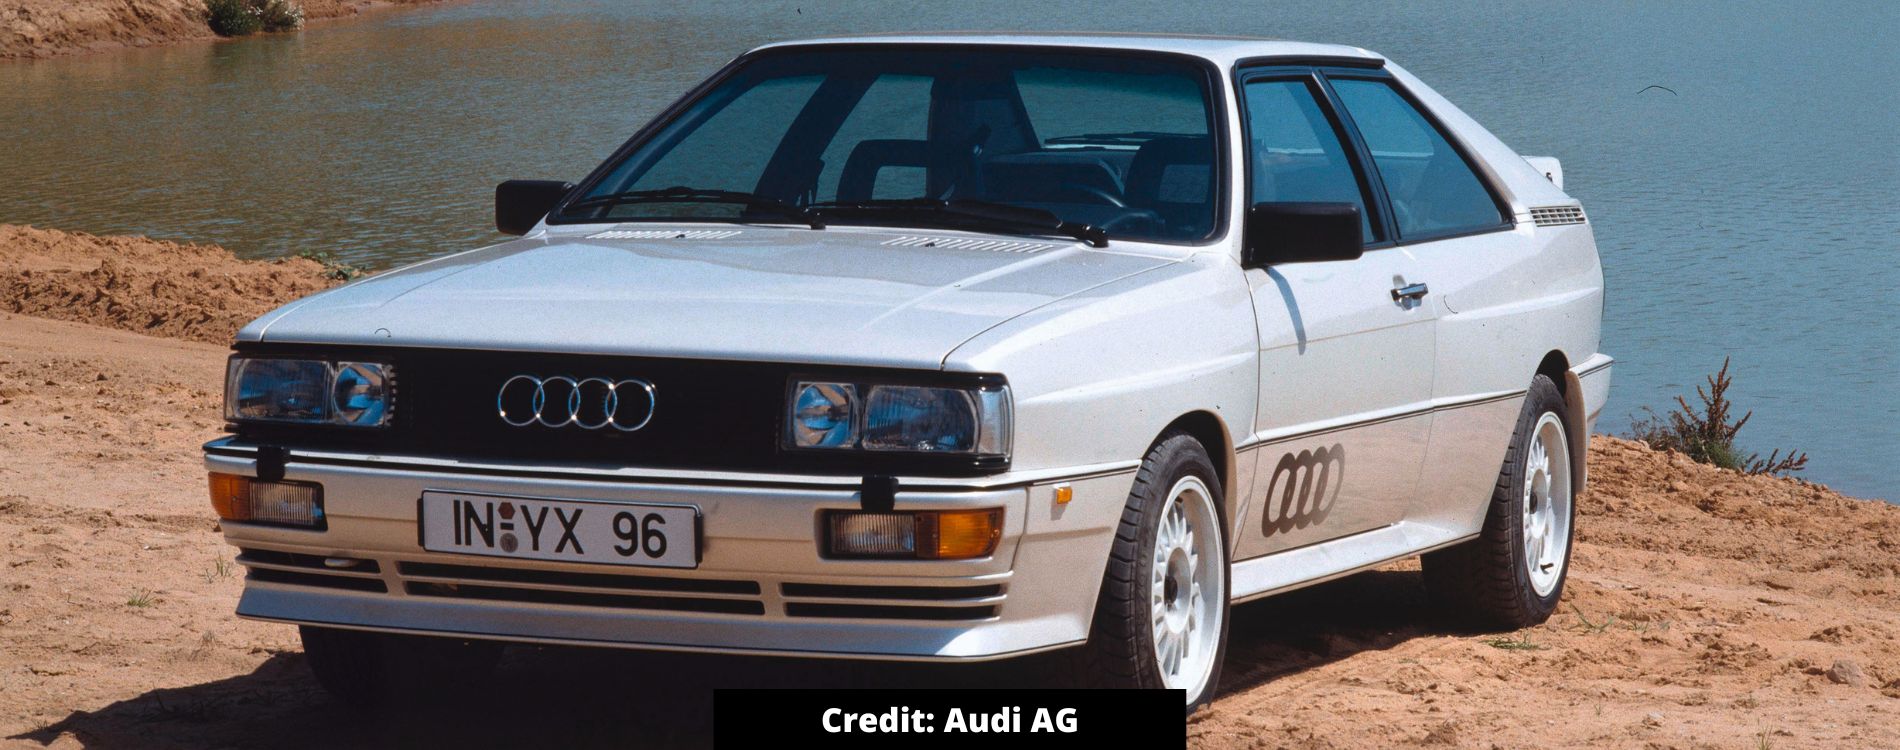 Performance heroes: The Audi inline five-cylinder